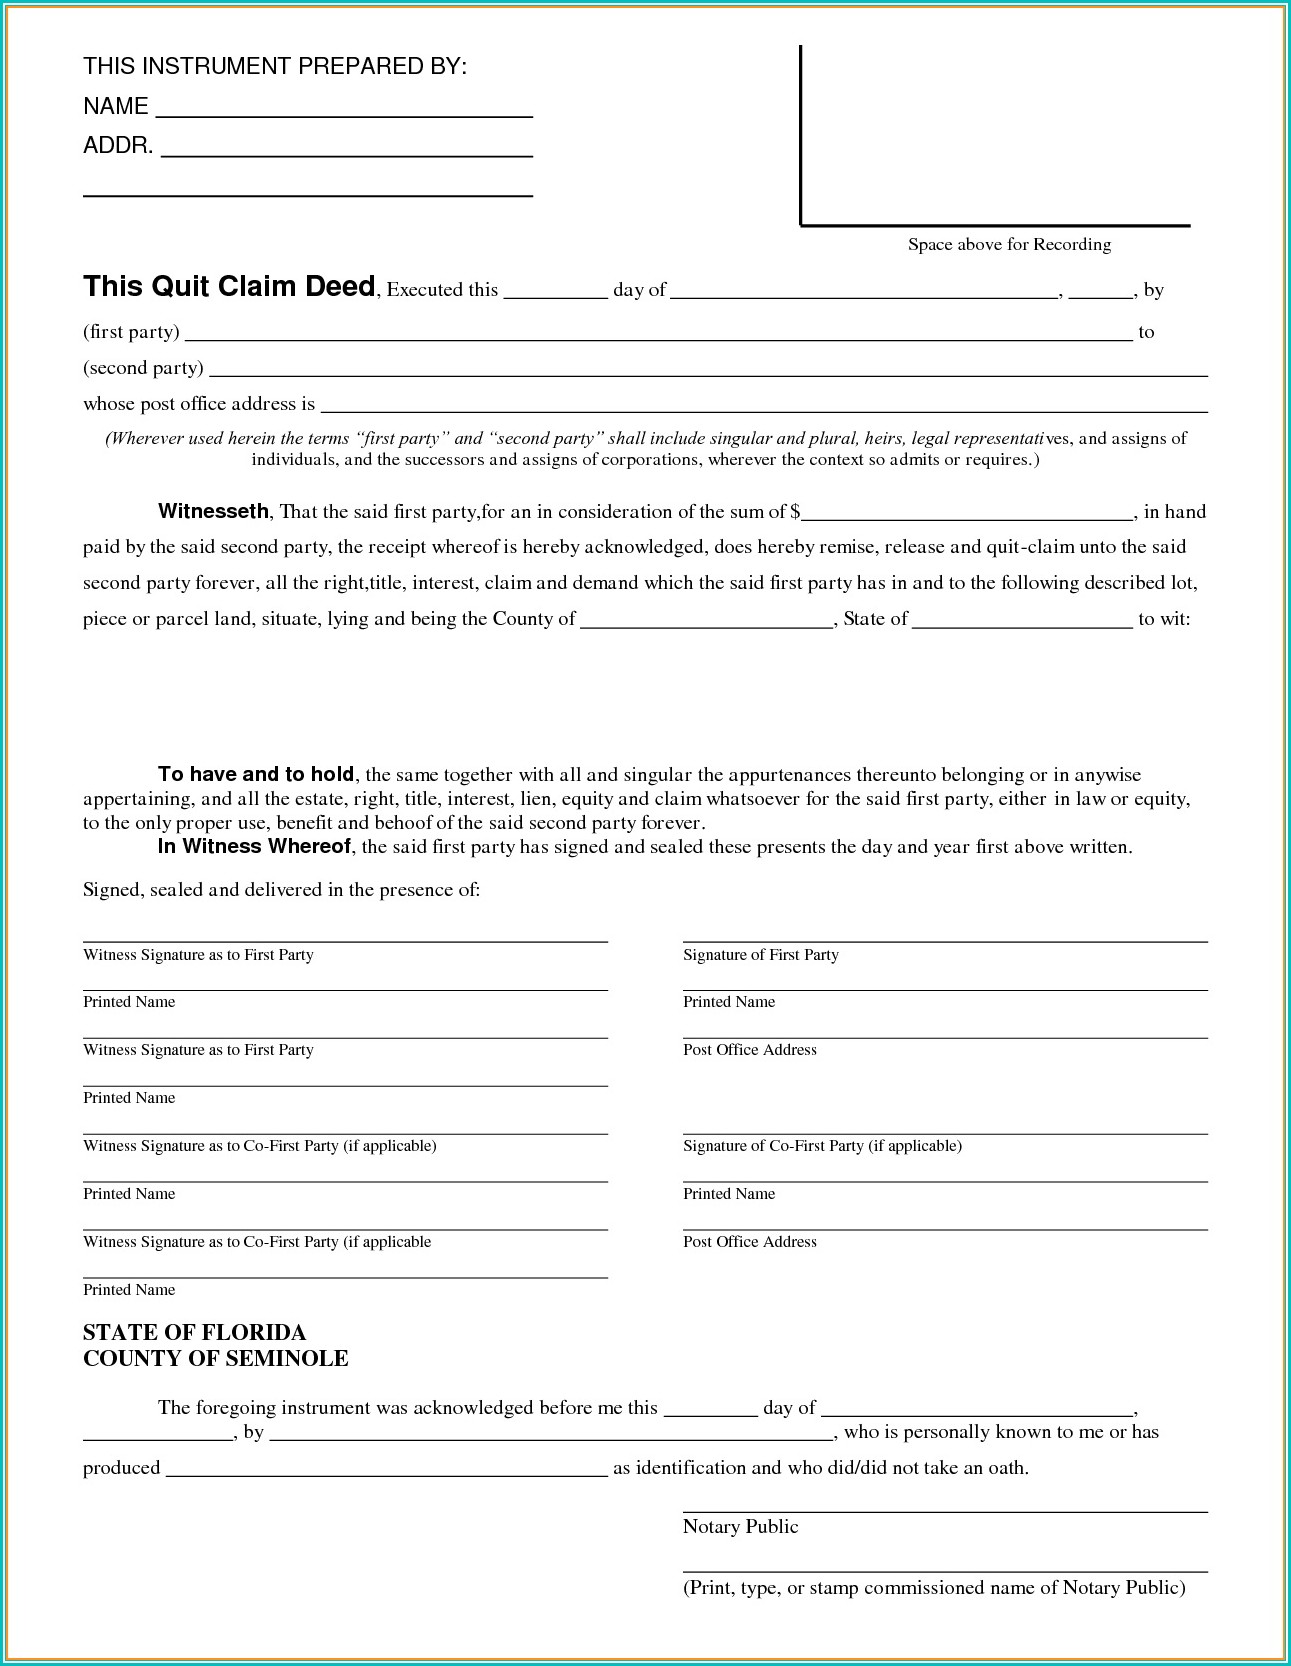 Quit Claim Deed Form Illinois Cook County